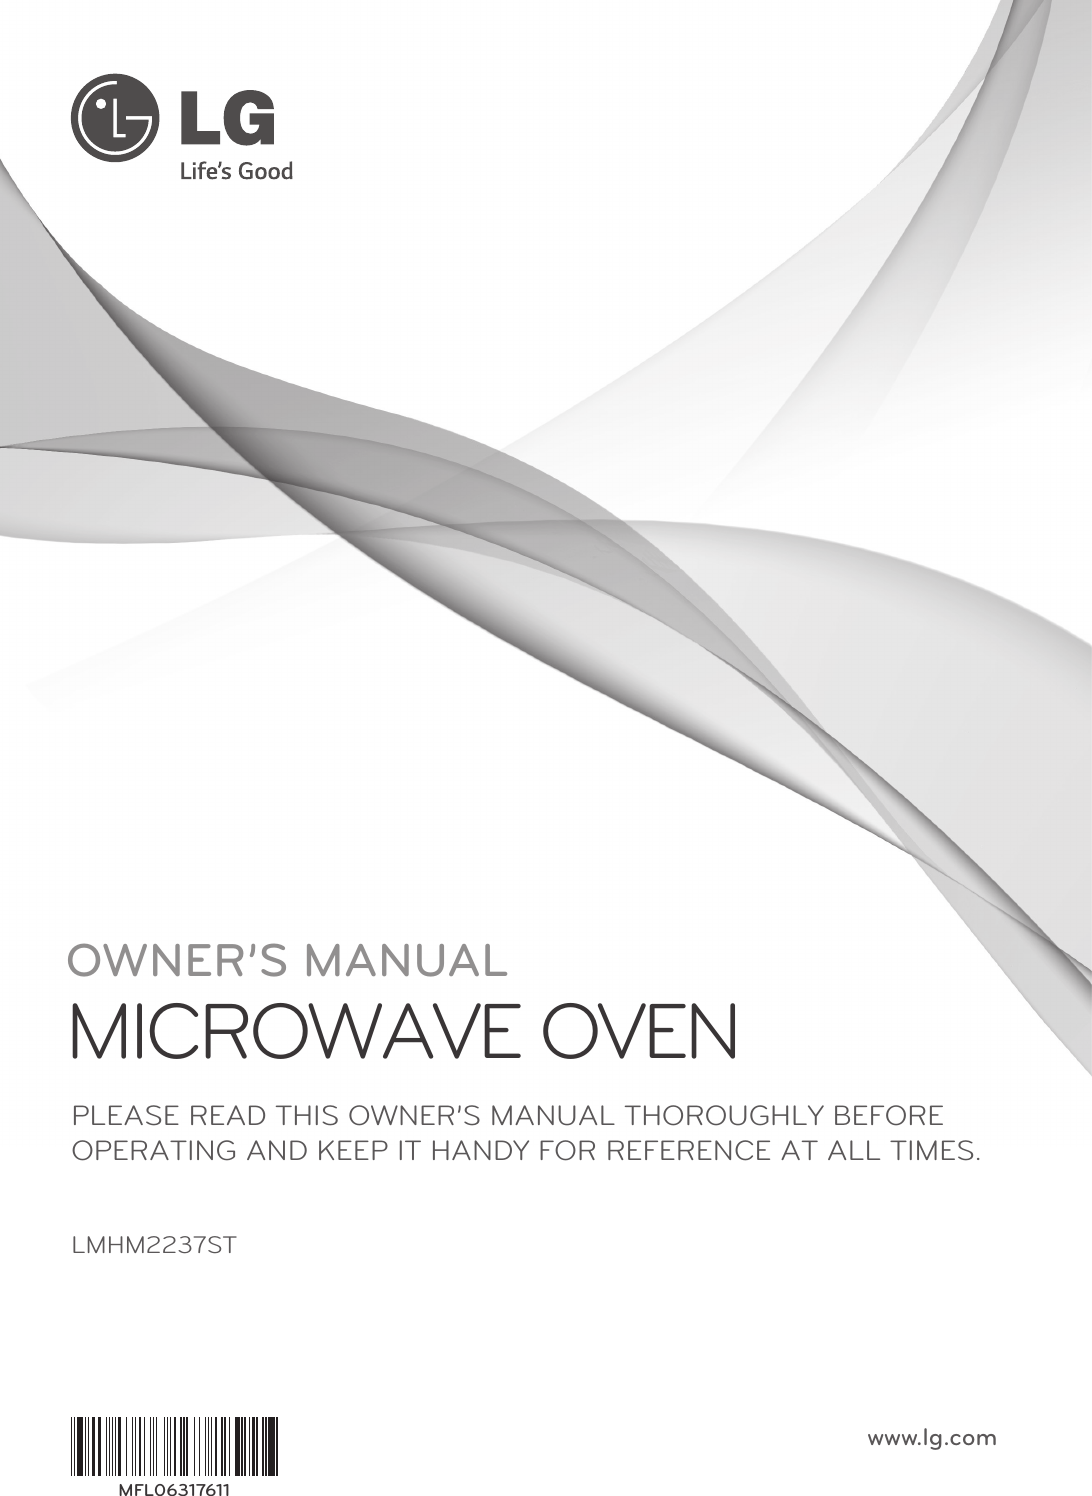 OWNER’S MANUALMICROWAVE OVENLMHM2237STPLEASE READ THIS OWNER’S MANUAL THOROUGHLY BEFOREOPERATING AND KEEP IT HANDY FOR REFERENCE AT ALL TIMES.www.lg.comMFL06317611